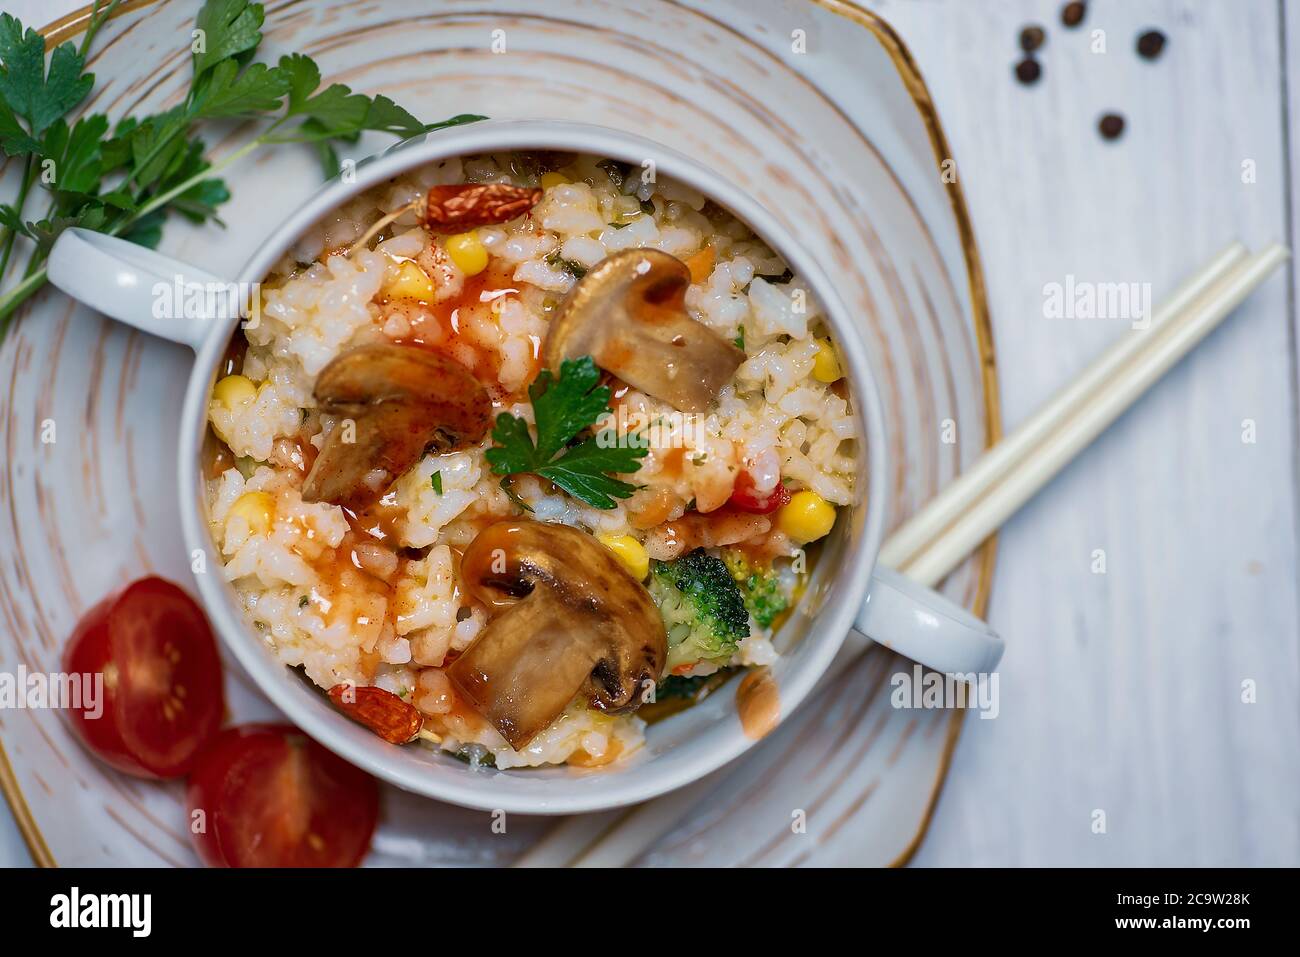 Homemade vegetarian risotto with mushrooms and vegetables on a plate Stock Photo